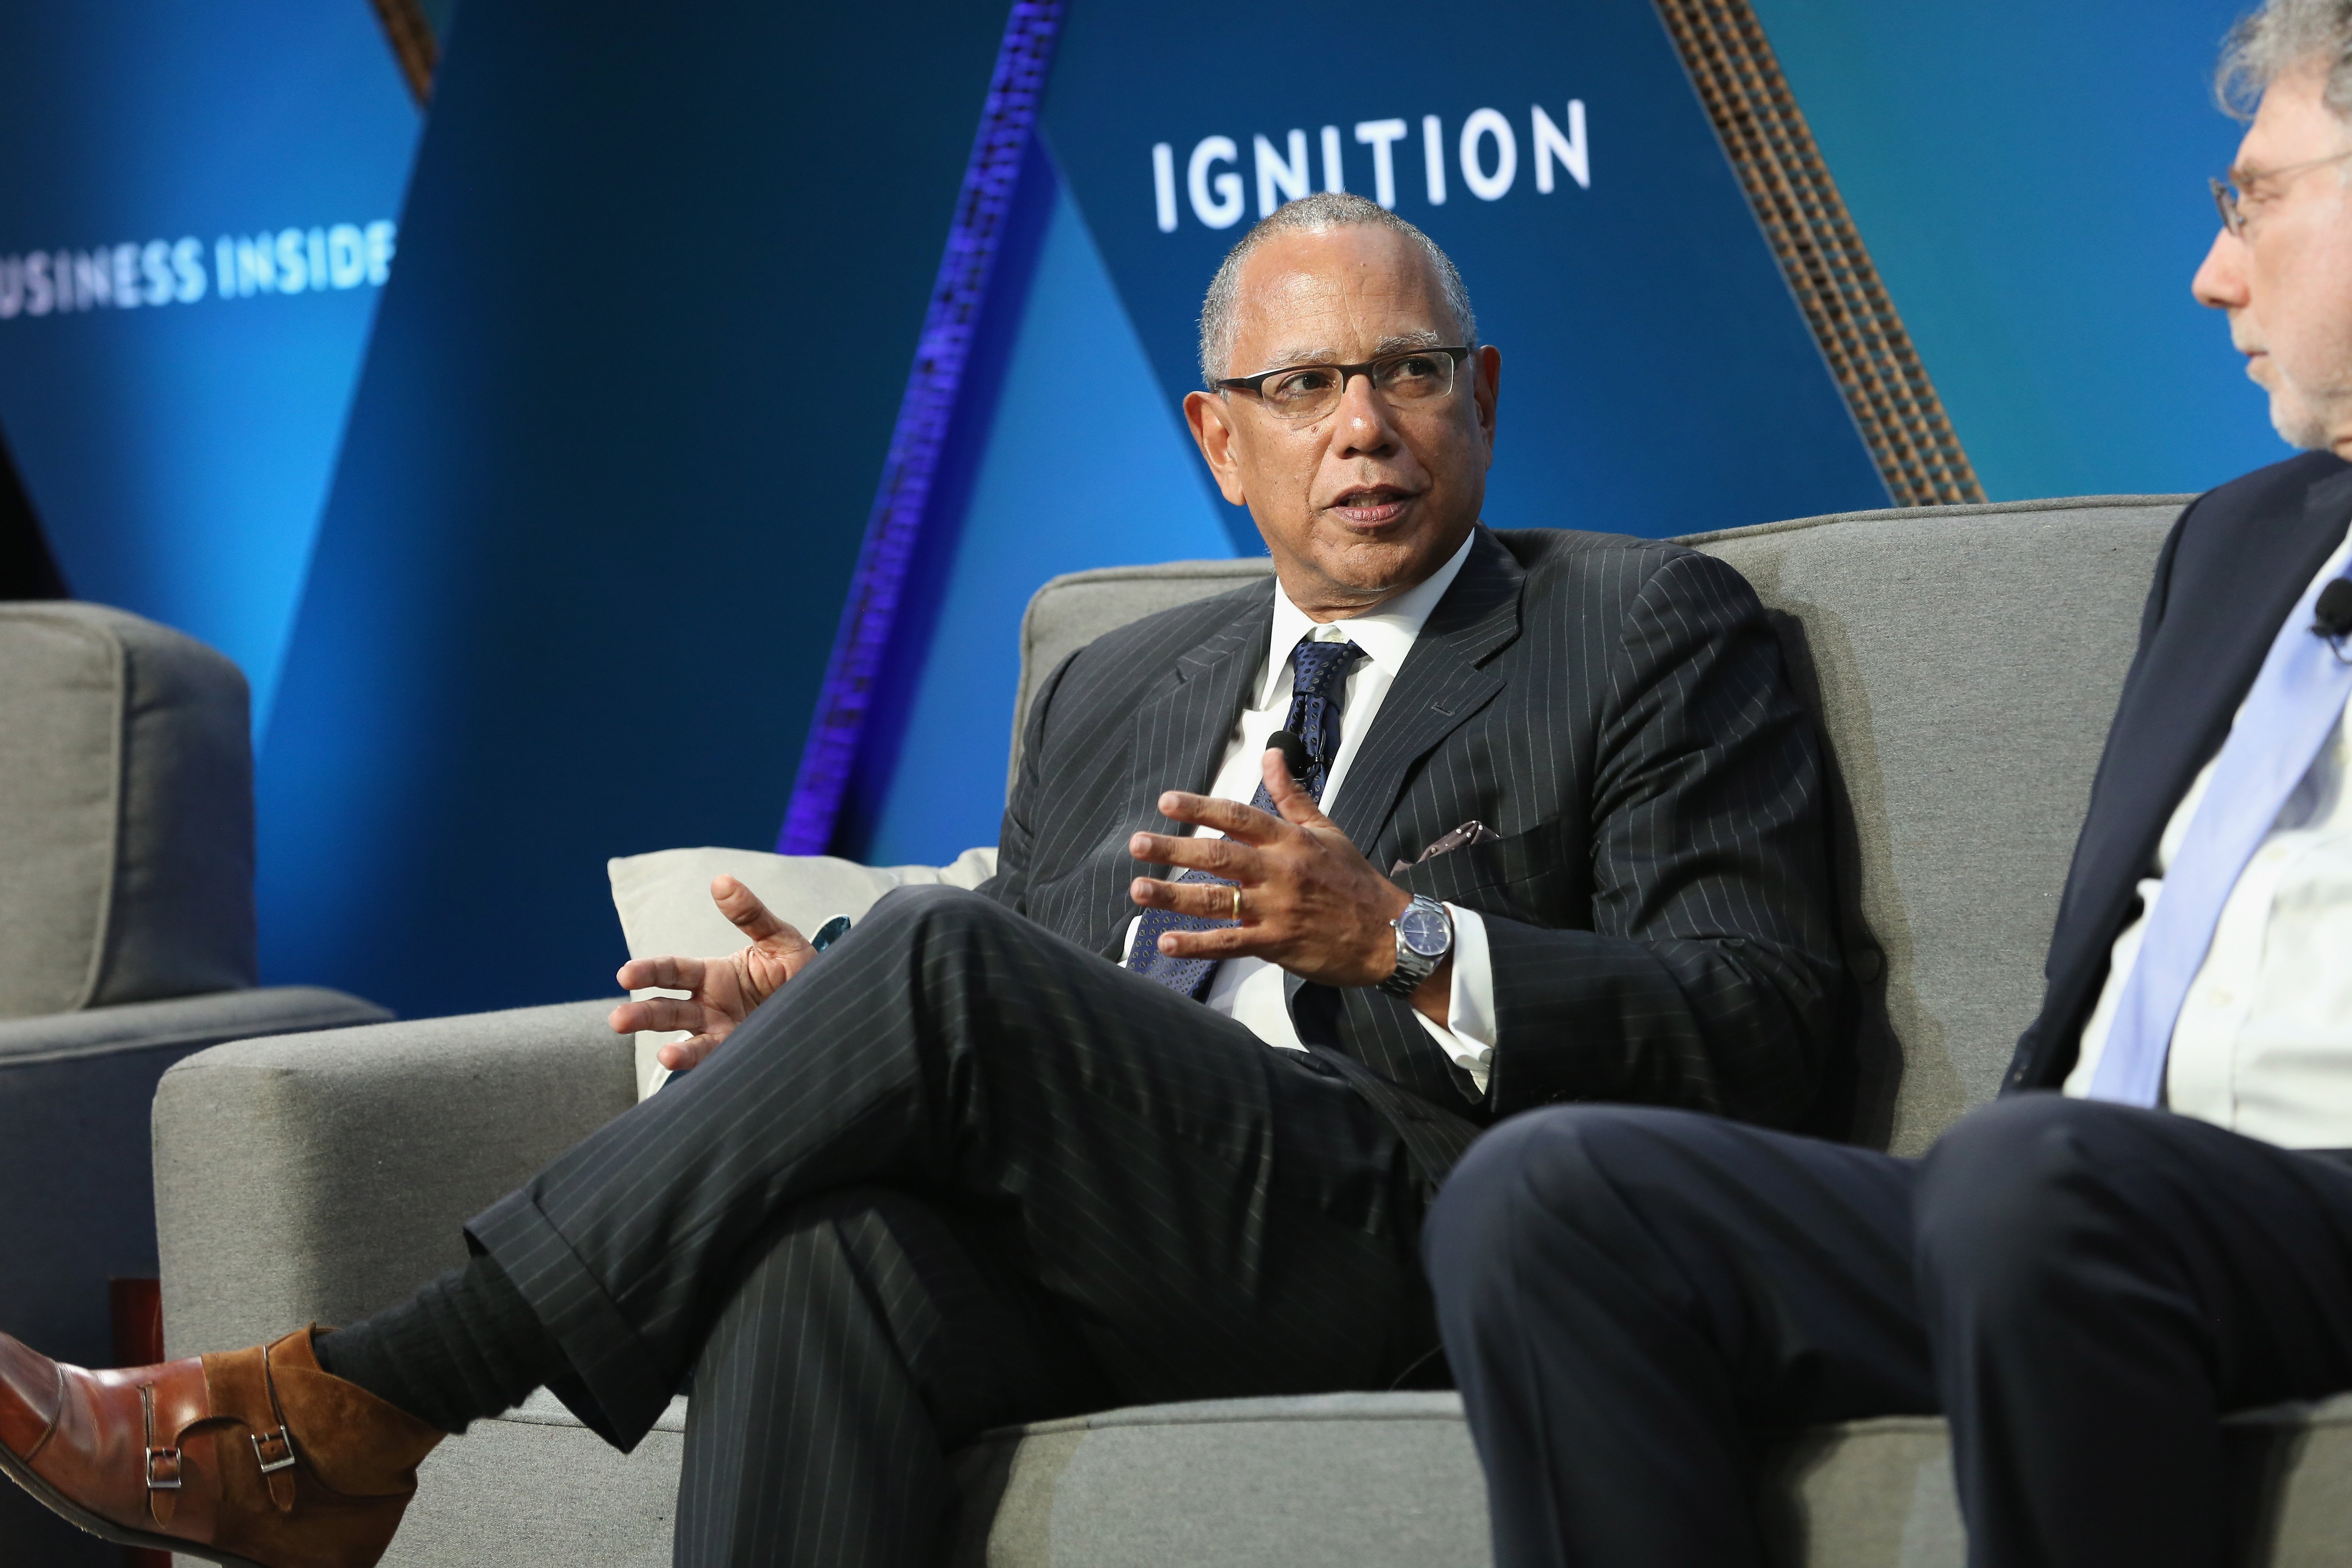 Dean Baquet, executive editor of The New York Times, speaks onstage at IGNITION: Future of Media at Time Warner Center on November 30, 2017 in New York City. (Monica Schipper/Getty Images)